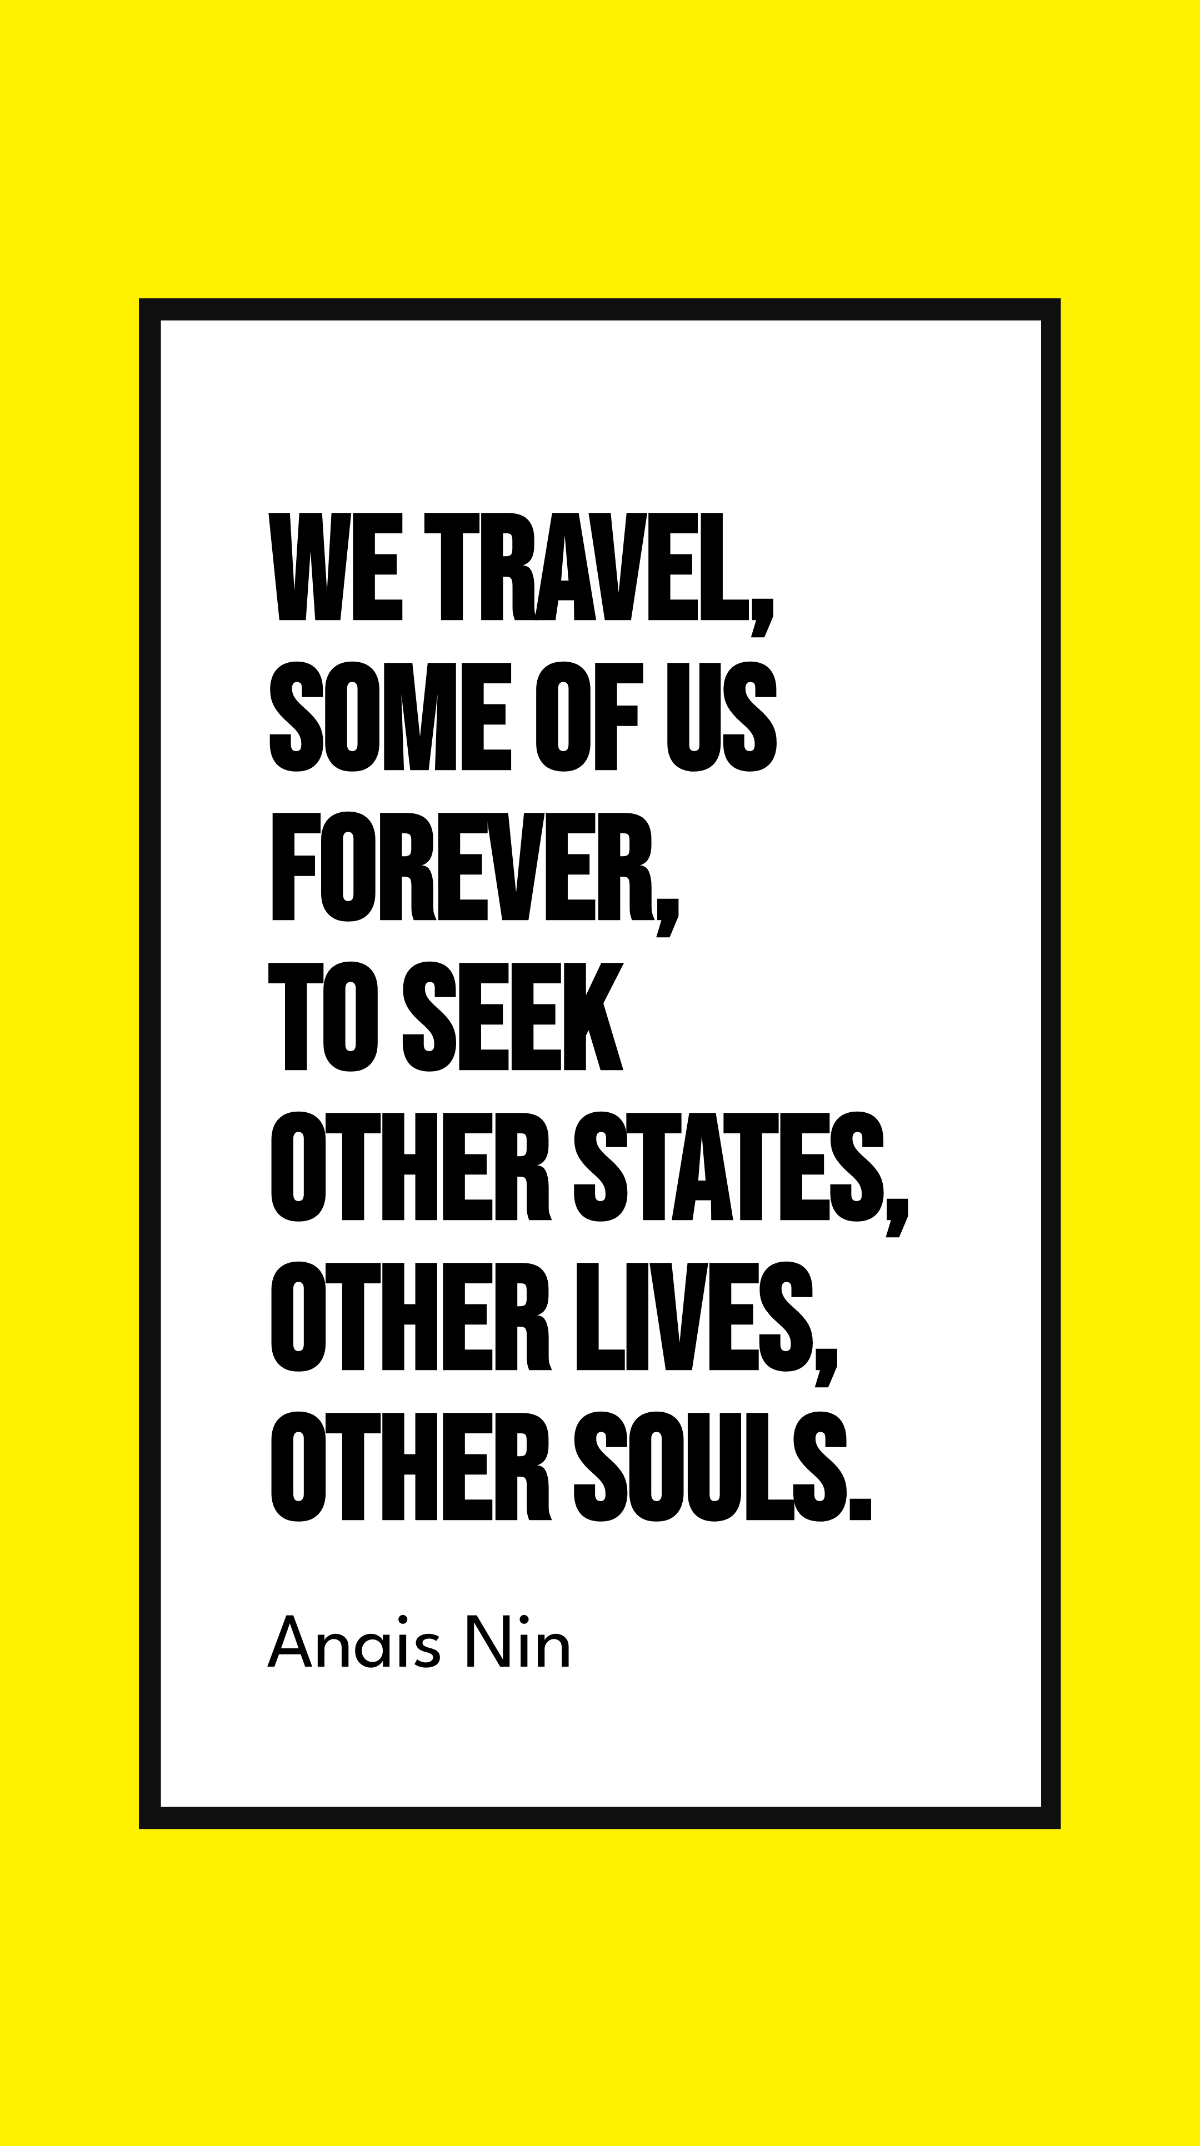 Free Anais Nin - We travel, some of us forever, to seek other states, other lives, other souls. Template